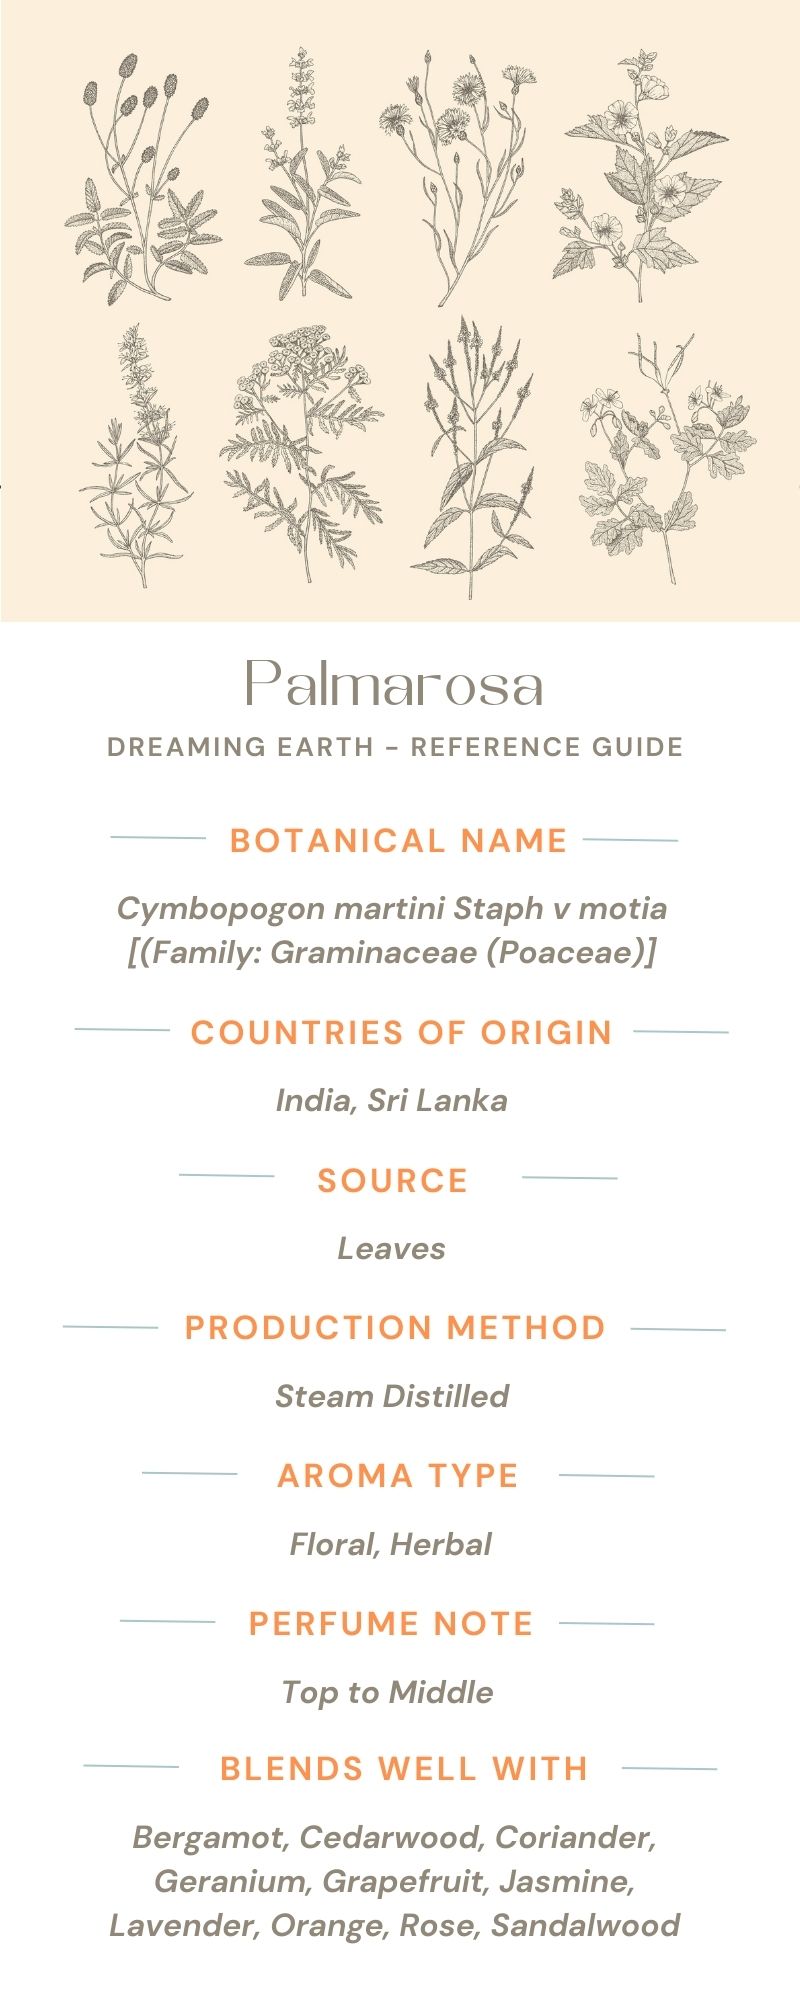 Load image into Gallery viewer, Palmarosa Organic Essential Oil - Dreaming Earth Inc
